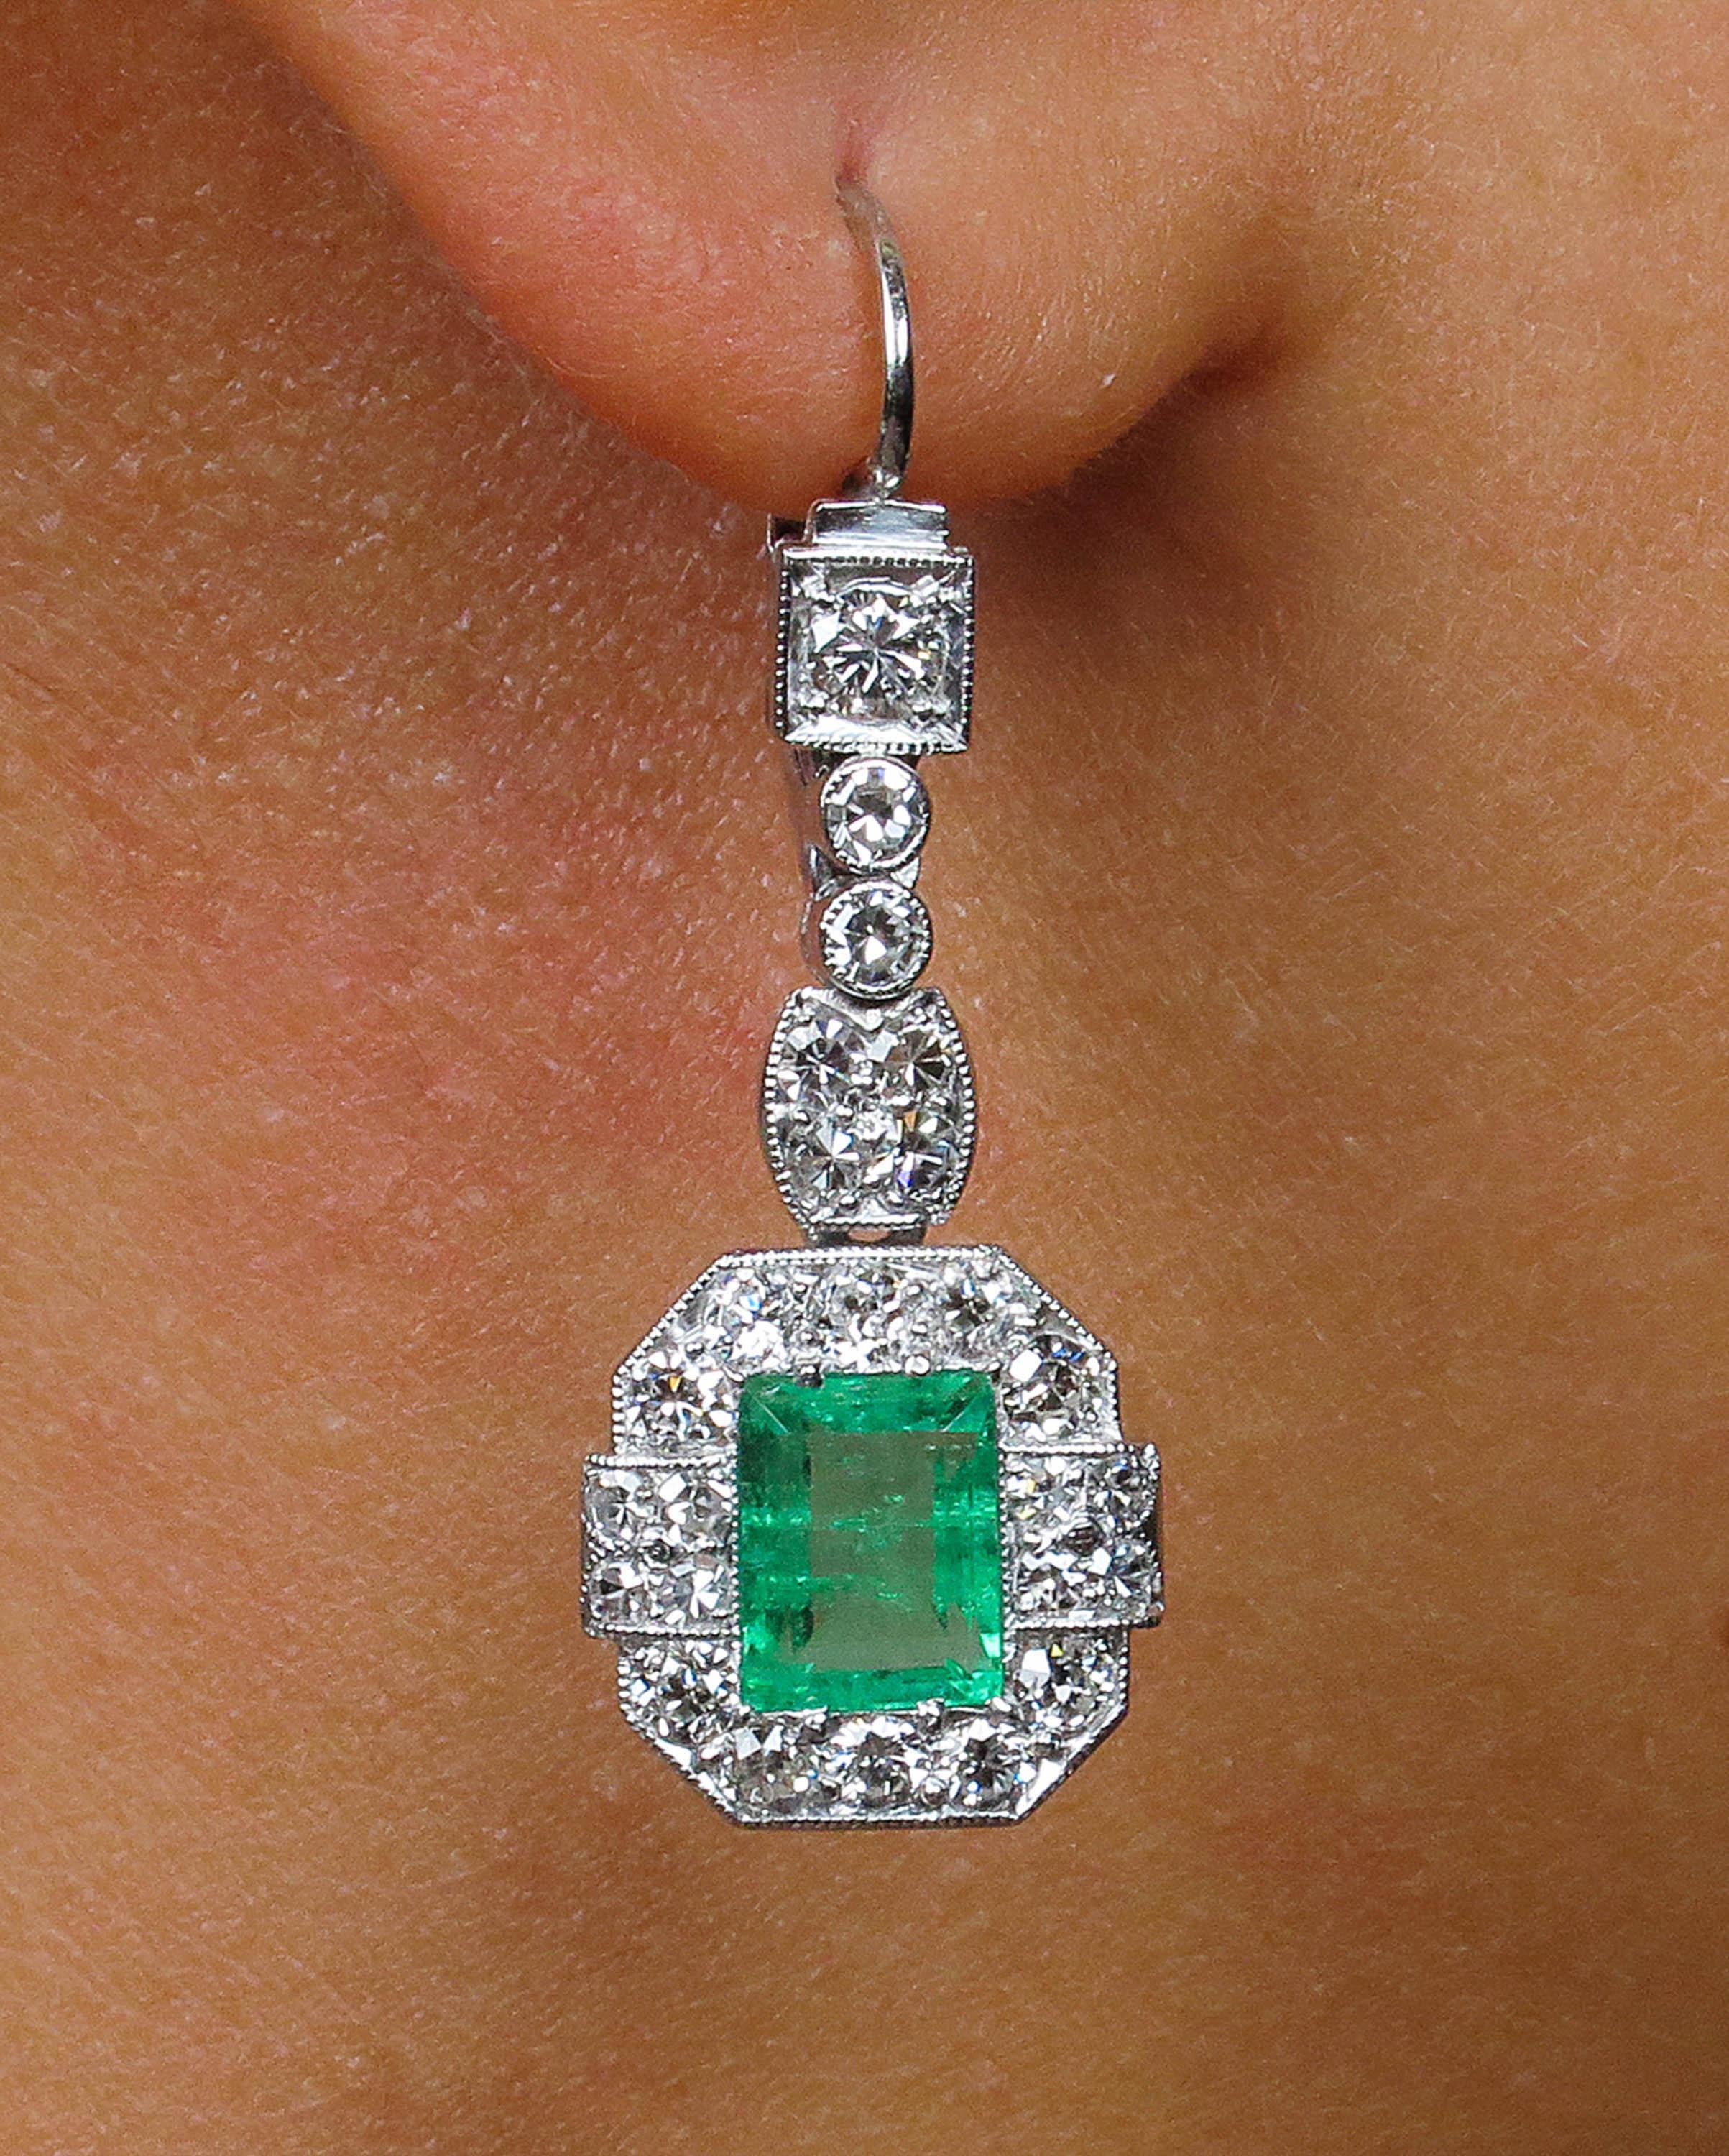 A wonderful Authentic Late Edwardian/ Early Art Deco CIRCA 1915s GIA Certified Green Emerald Diamond Drop Earrings in Platinum (tested).
The each Center Stone is Natural Colombian Green Step cut Emerald, estimated total weight is 2.46ct. NO